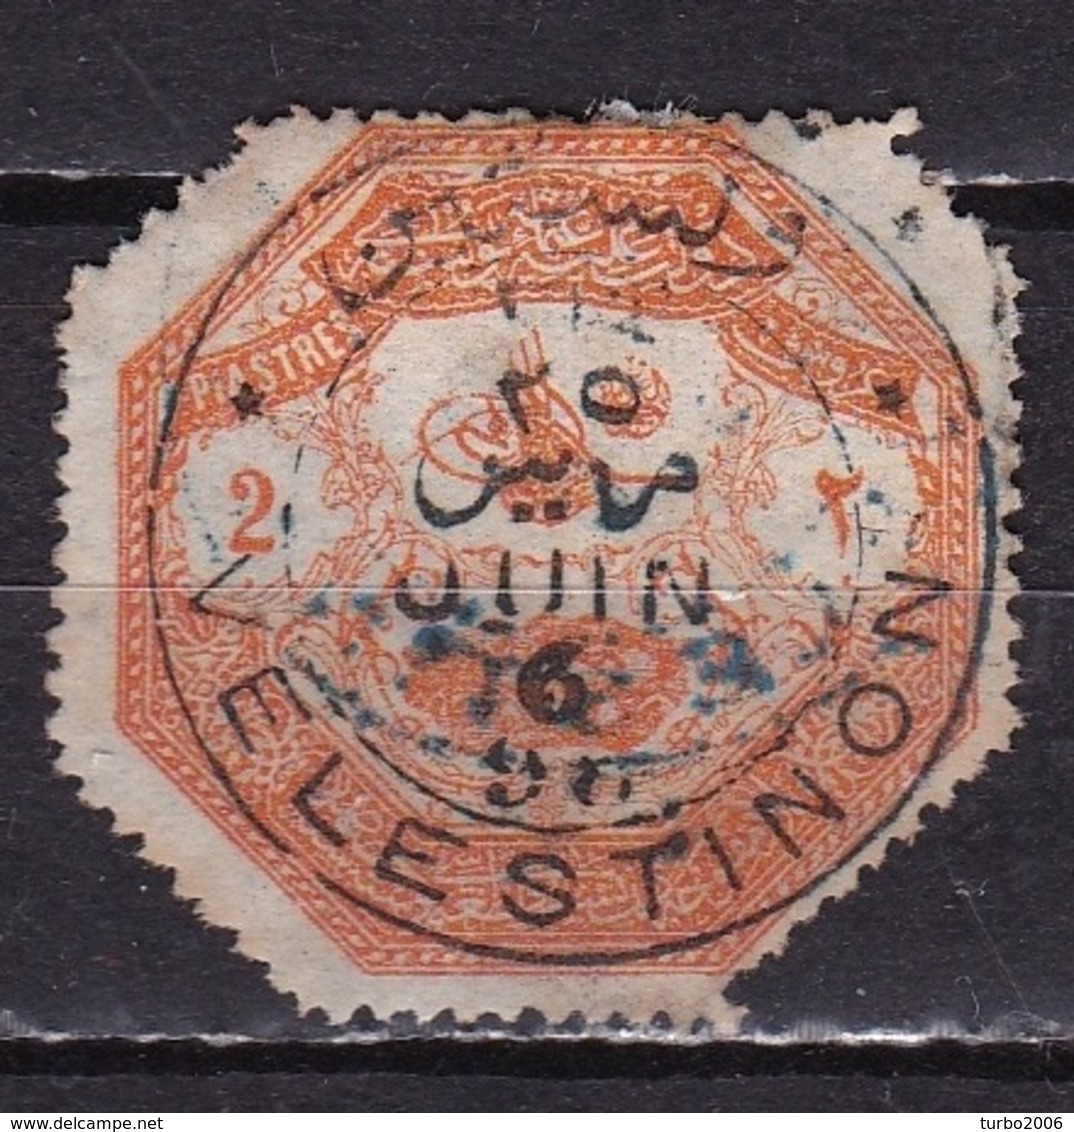 THESSALIA  1898 2 Pi Orange Used VELESTINON By The Turkish Army Of Occupation During The Greek-Turkish War Of 1897 Vl. 4 - Thessalië